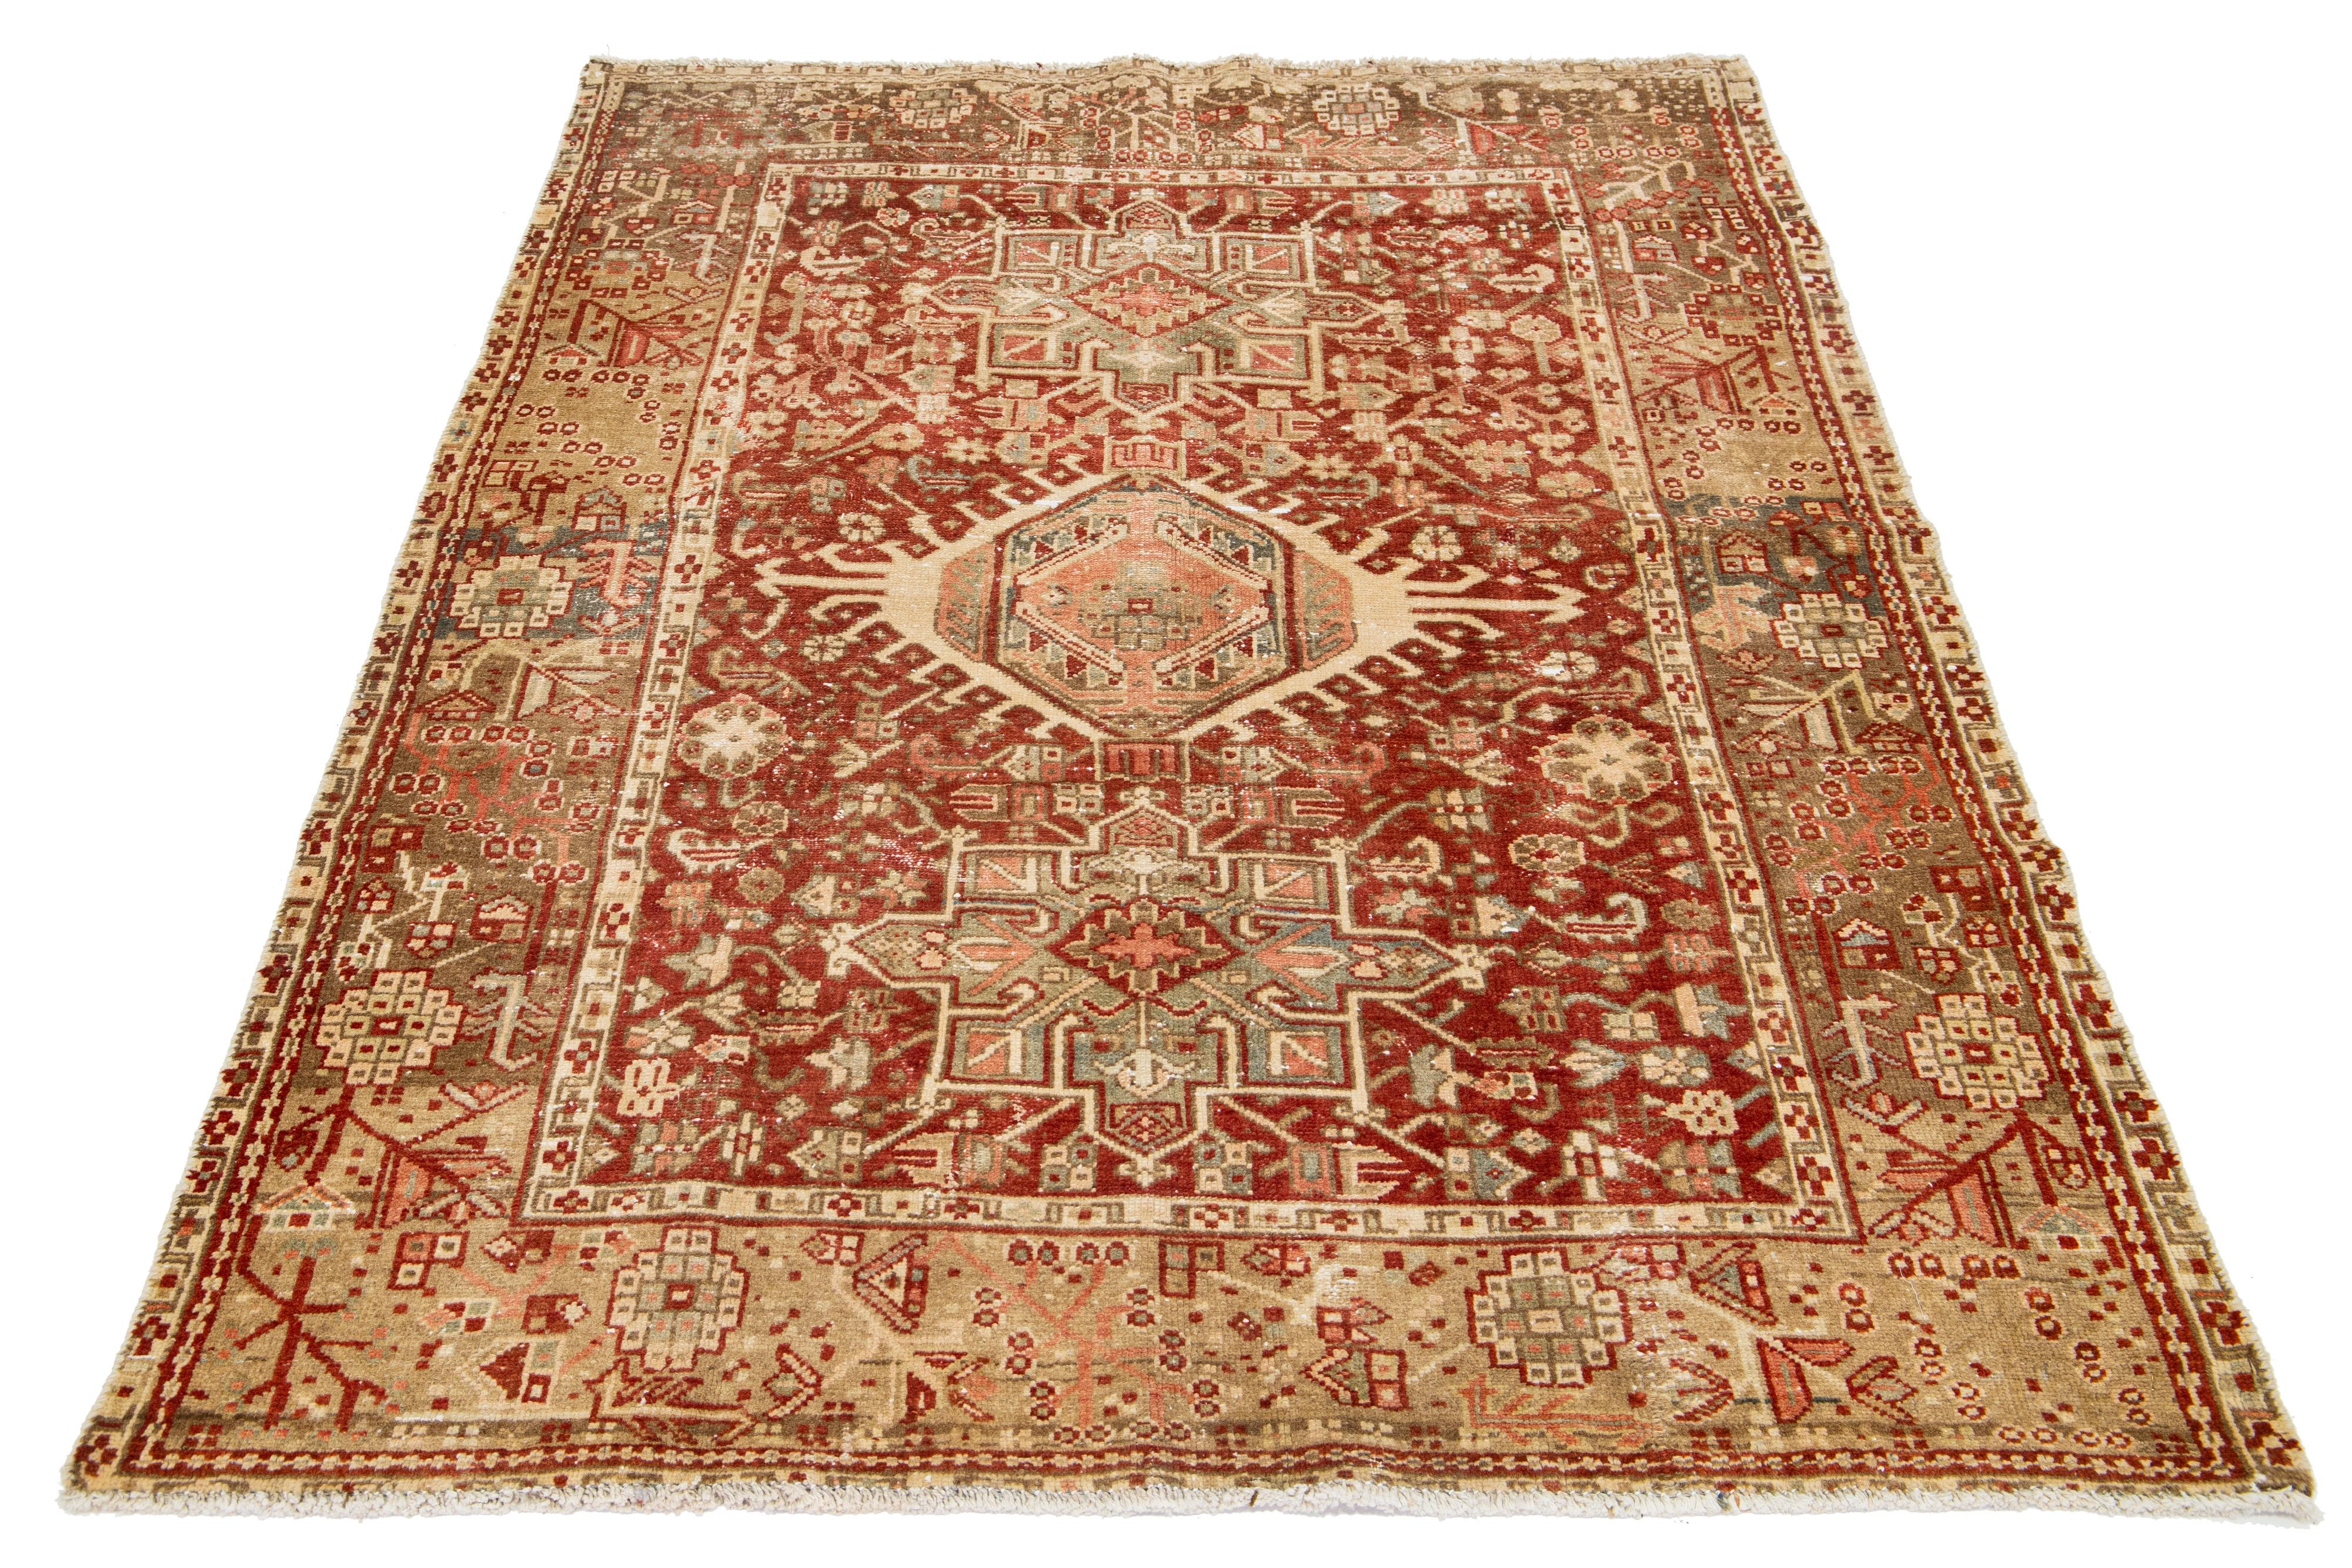 This antique Persian Heriz rug is made with hand-knotted wool. The rust-red field showcases a captivating medallion pattern adorned with beige, peach, and brown shades.

This rug measures 4'7